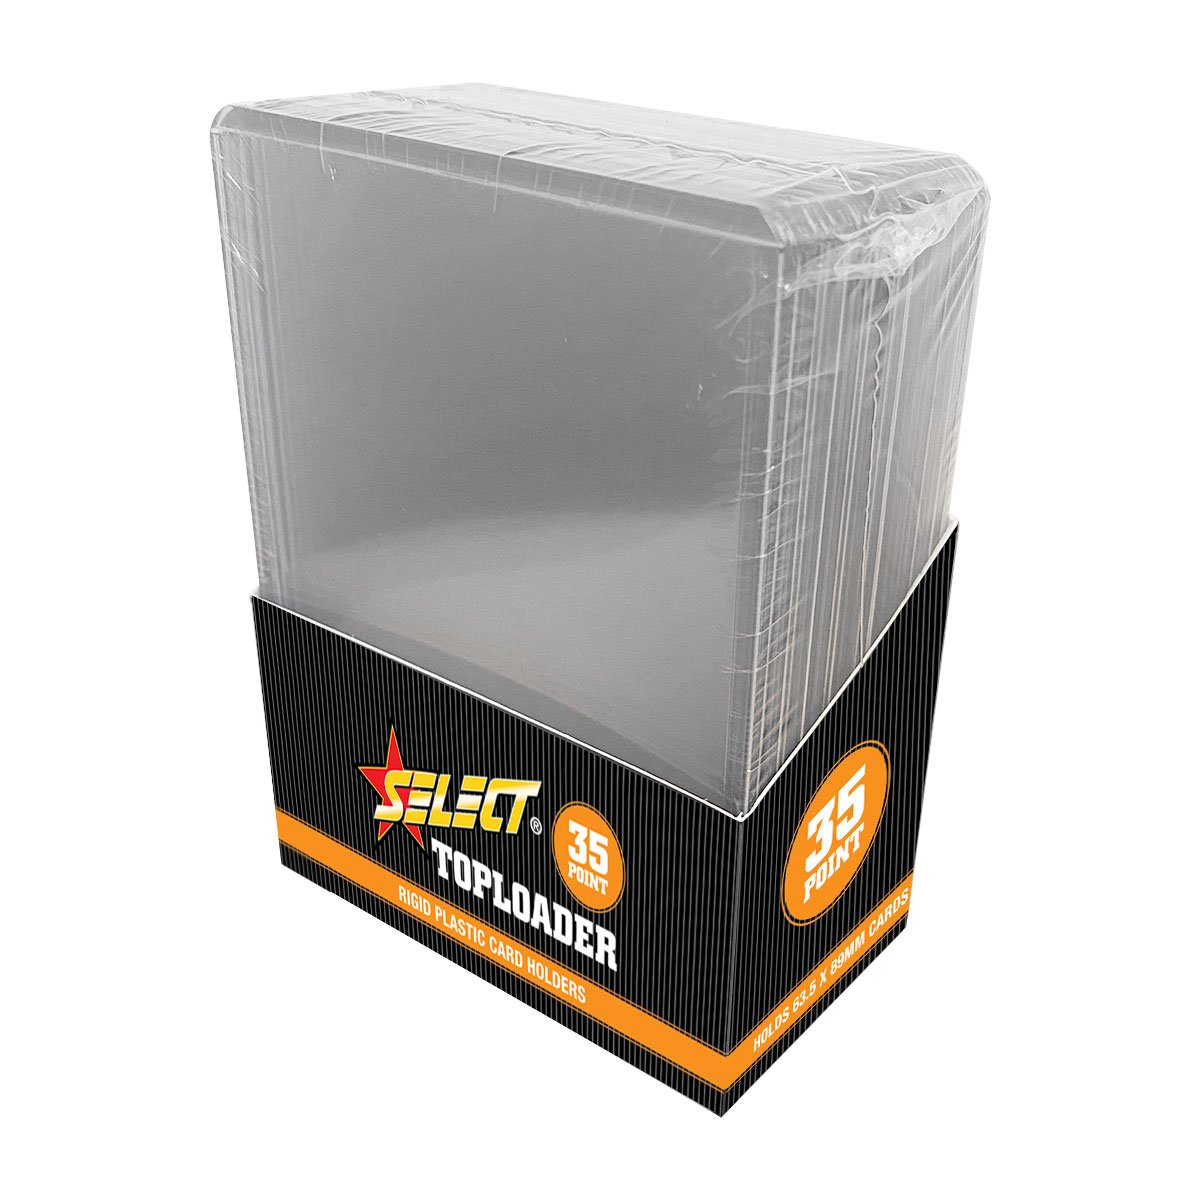 Select Australia 35pt Top Loader Sport Card Protector 4 Packets of 25 (100 in total)